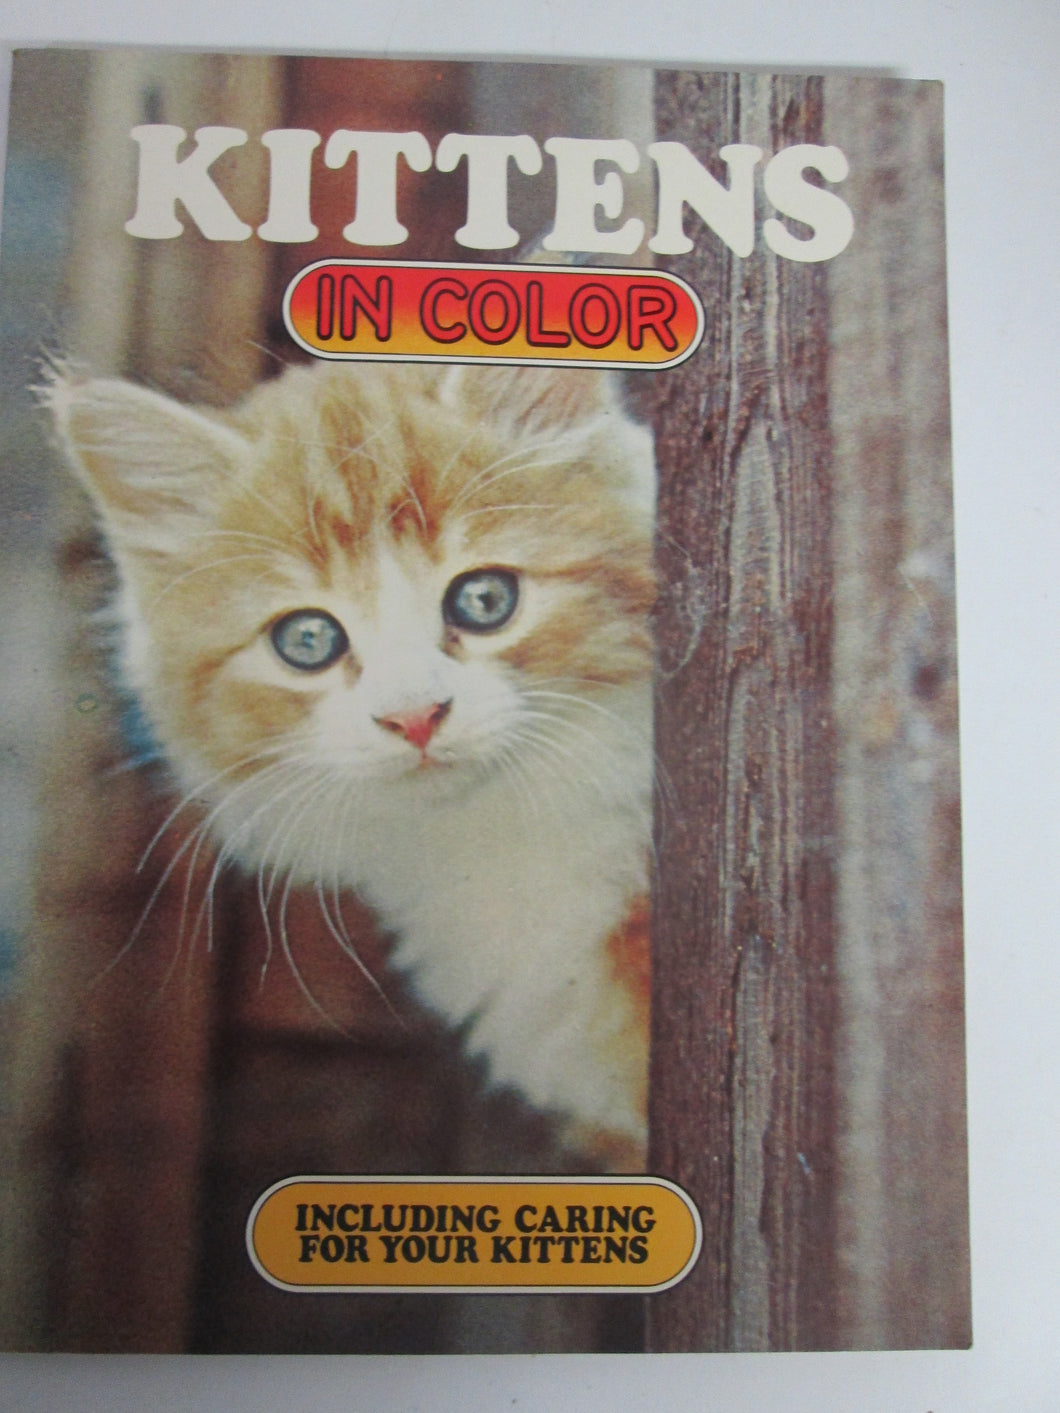 Kittens In Color Including Caring for Your Kittens PB 1979